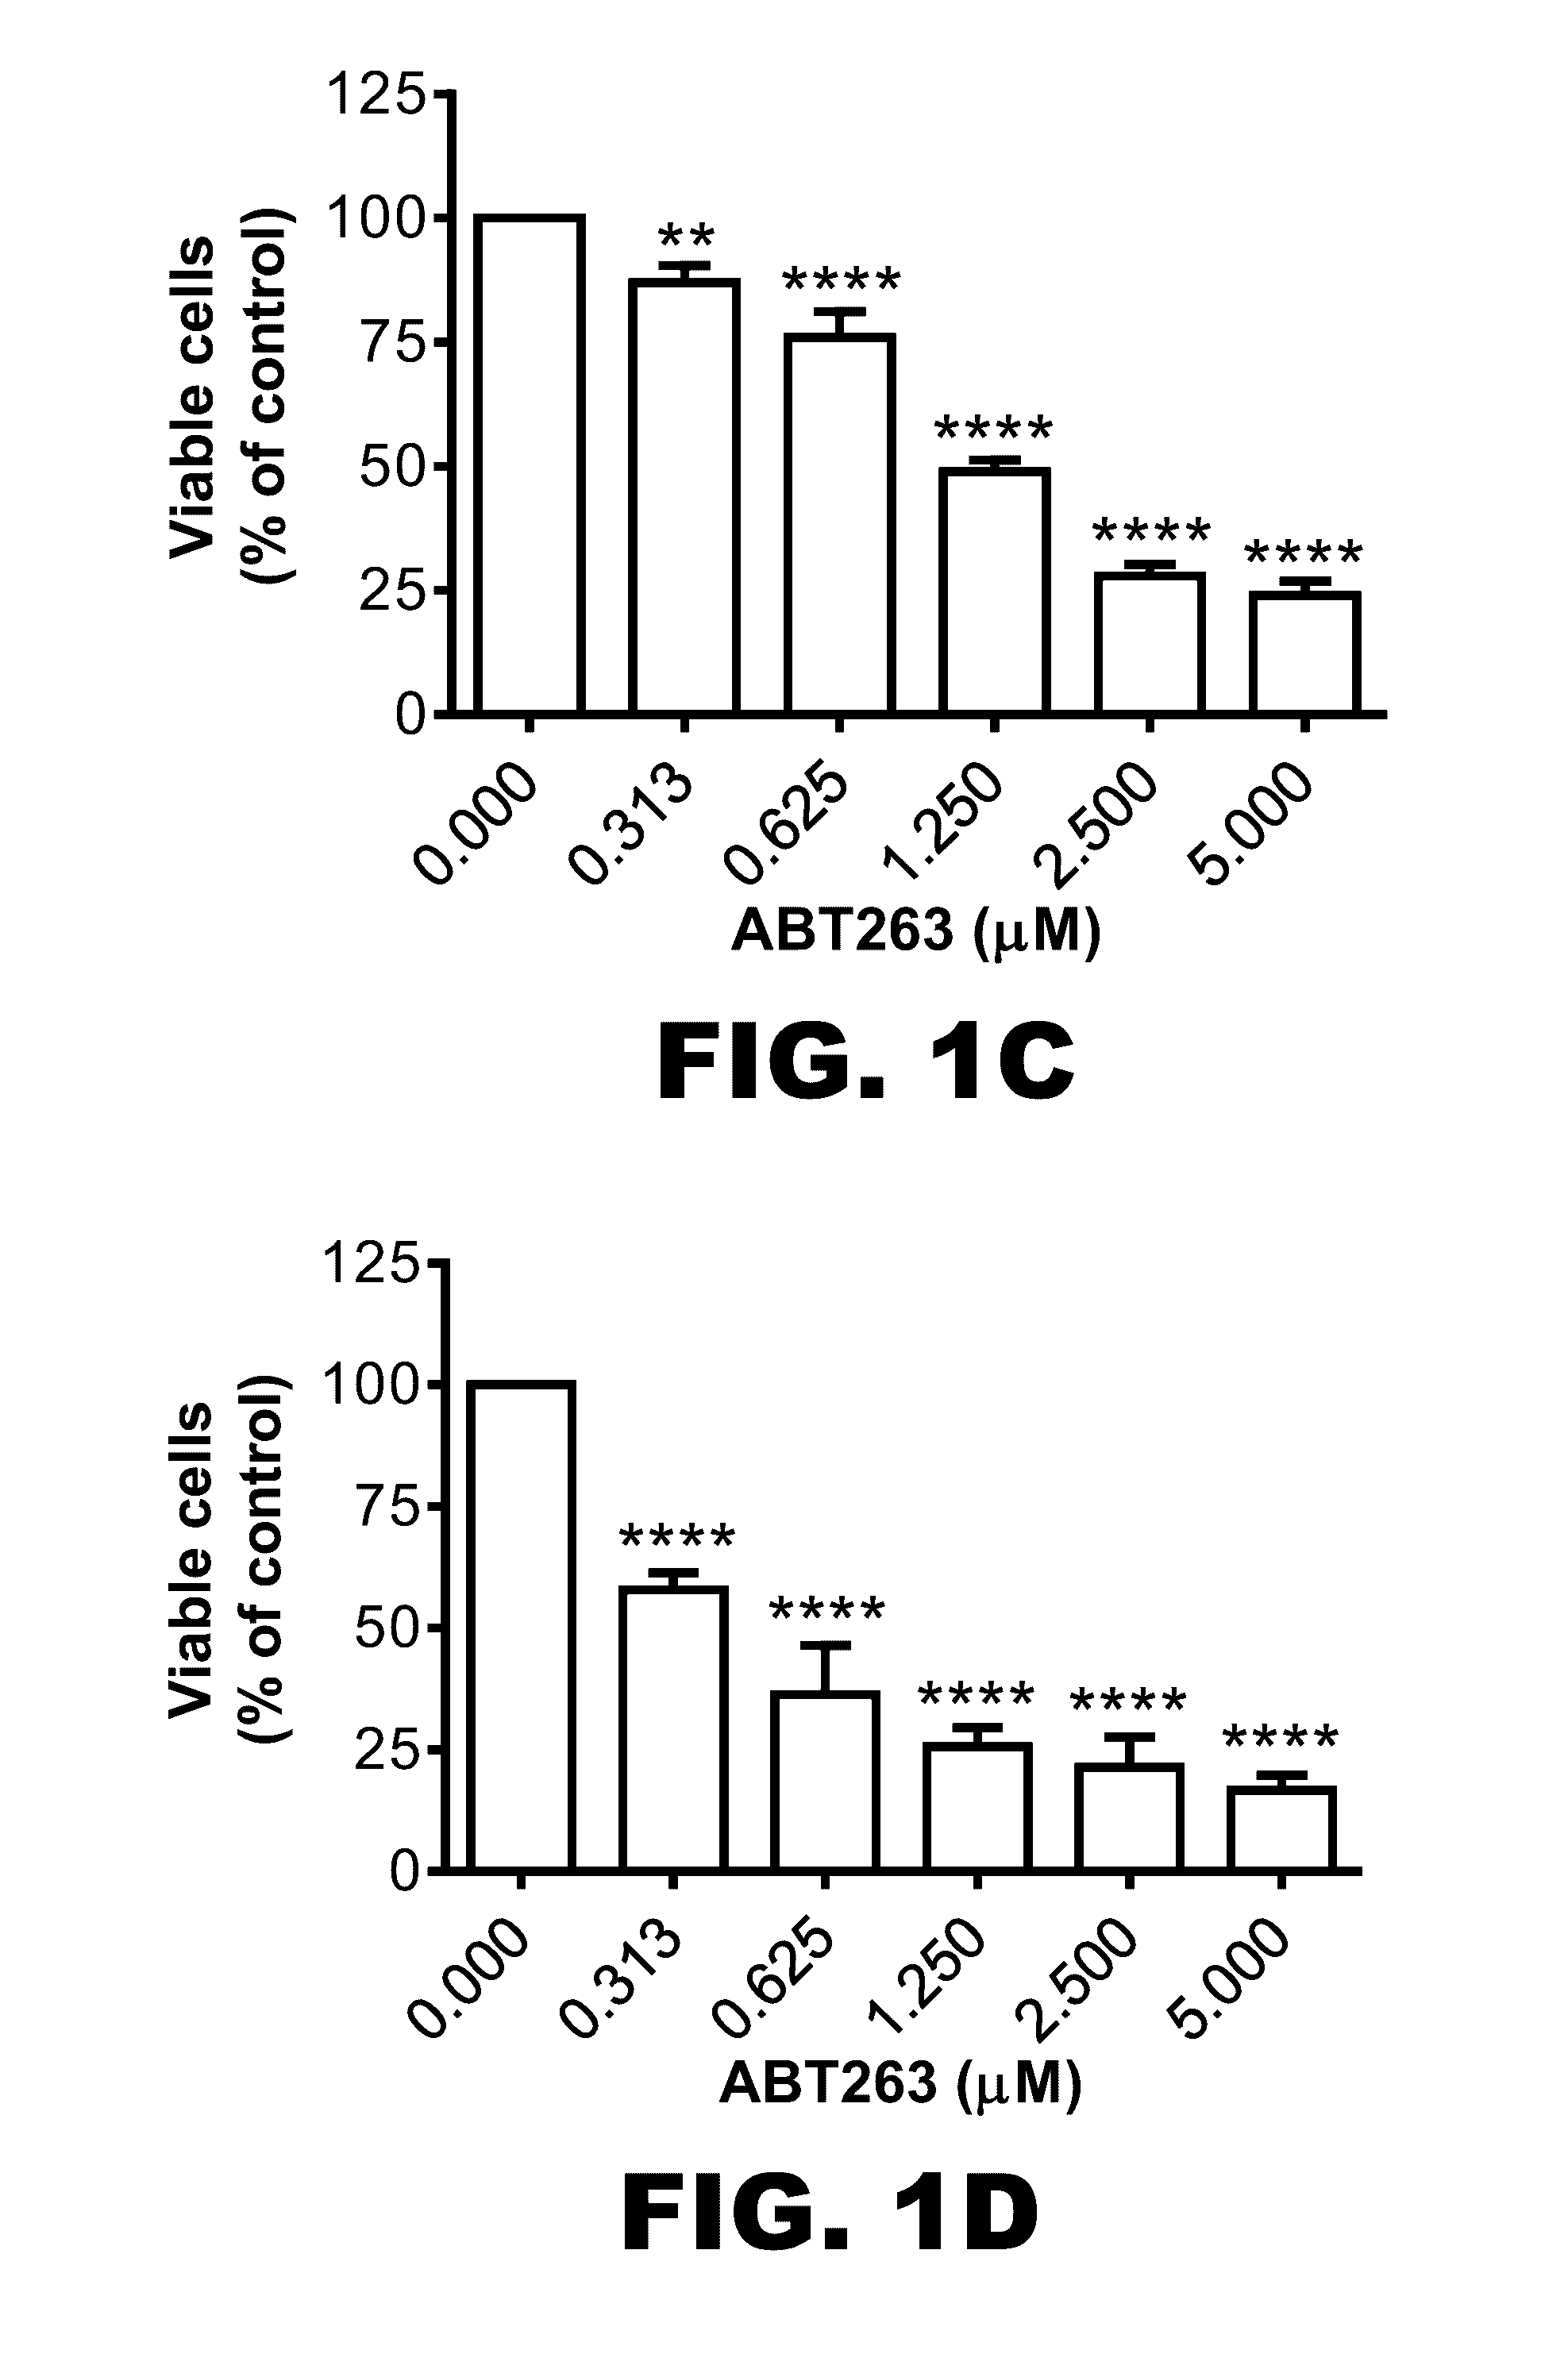 COMPOSITIONS AND METHODS FOR INHIBITING ANTIAPOPTOTIC Bcl-2 PROTEINS AS ANTI-AGING AGENTS